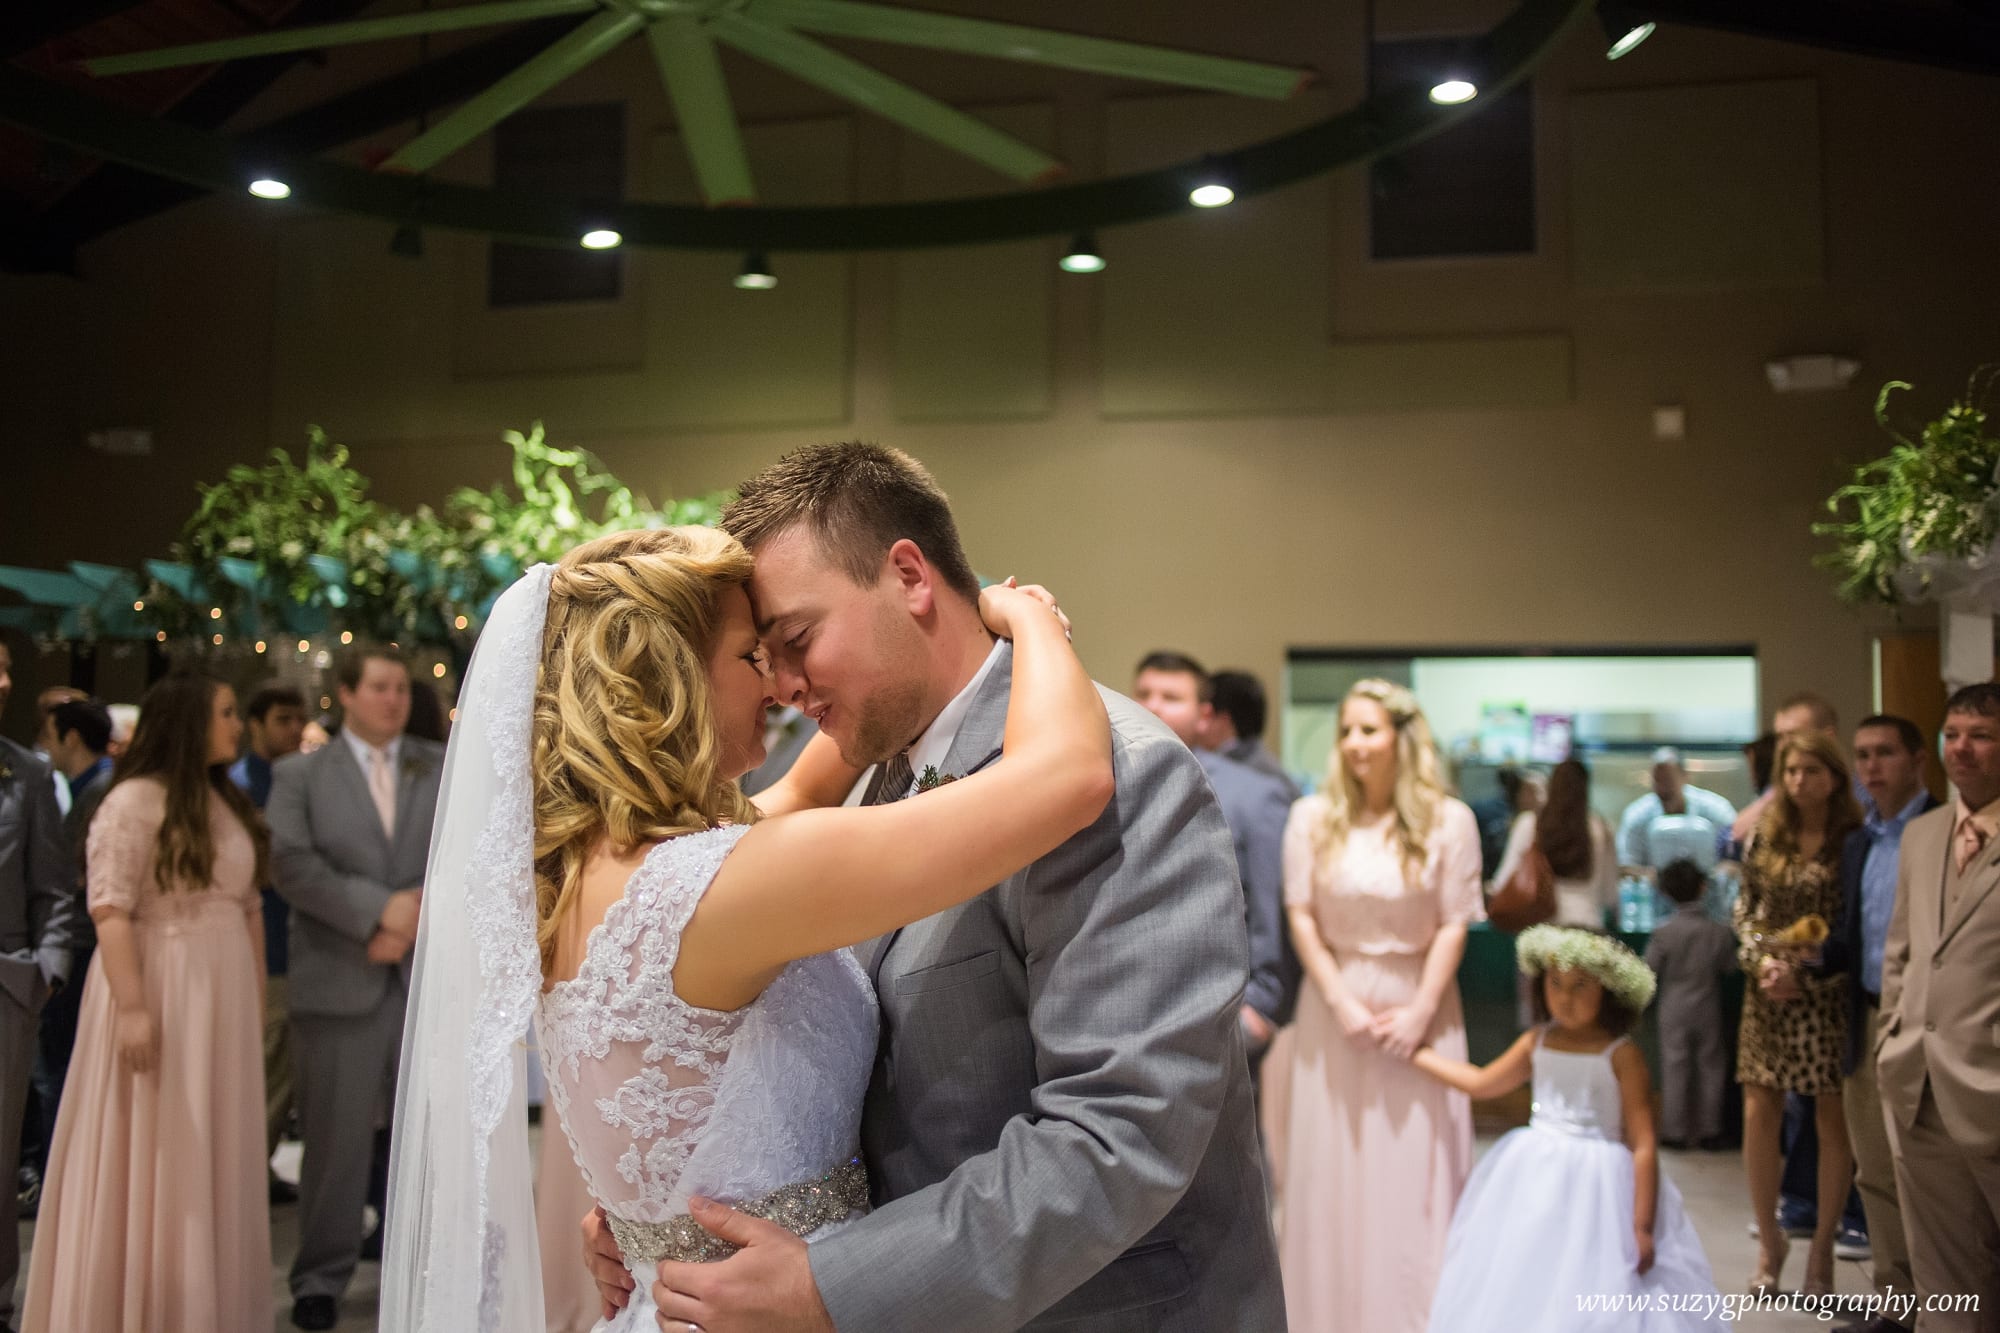 vows by victoria-lake charles-wedding-photography-suzy g-photography-suzygphotography_0080